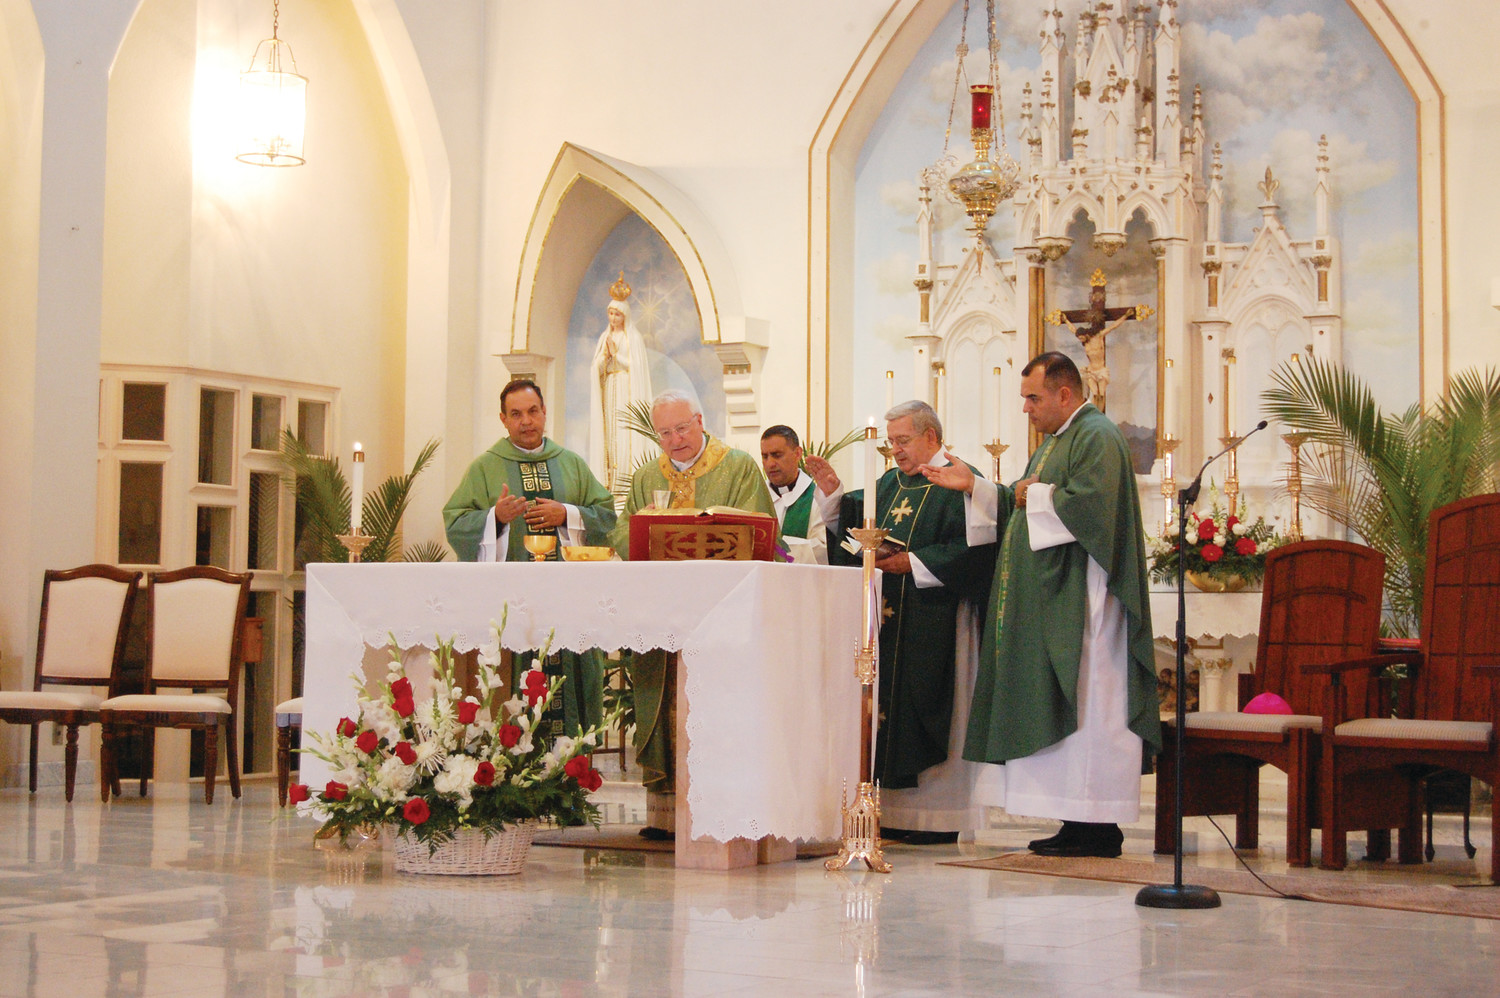 Father Marinald Batista, C.S.P., the new pastor at St. Elizabeth’s Church in Bristol, at left, concelebrates his installation Mass with Auxiliary Bishop Robert Evans, center.